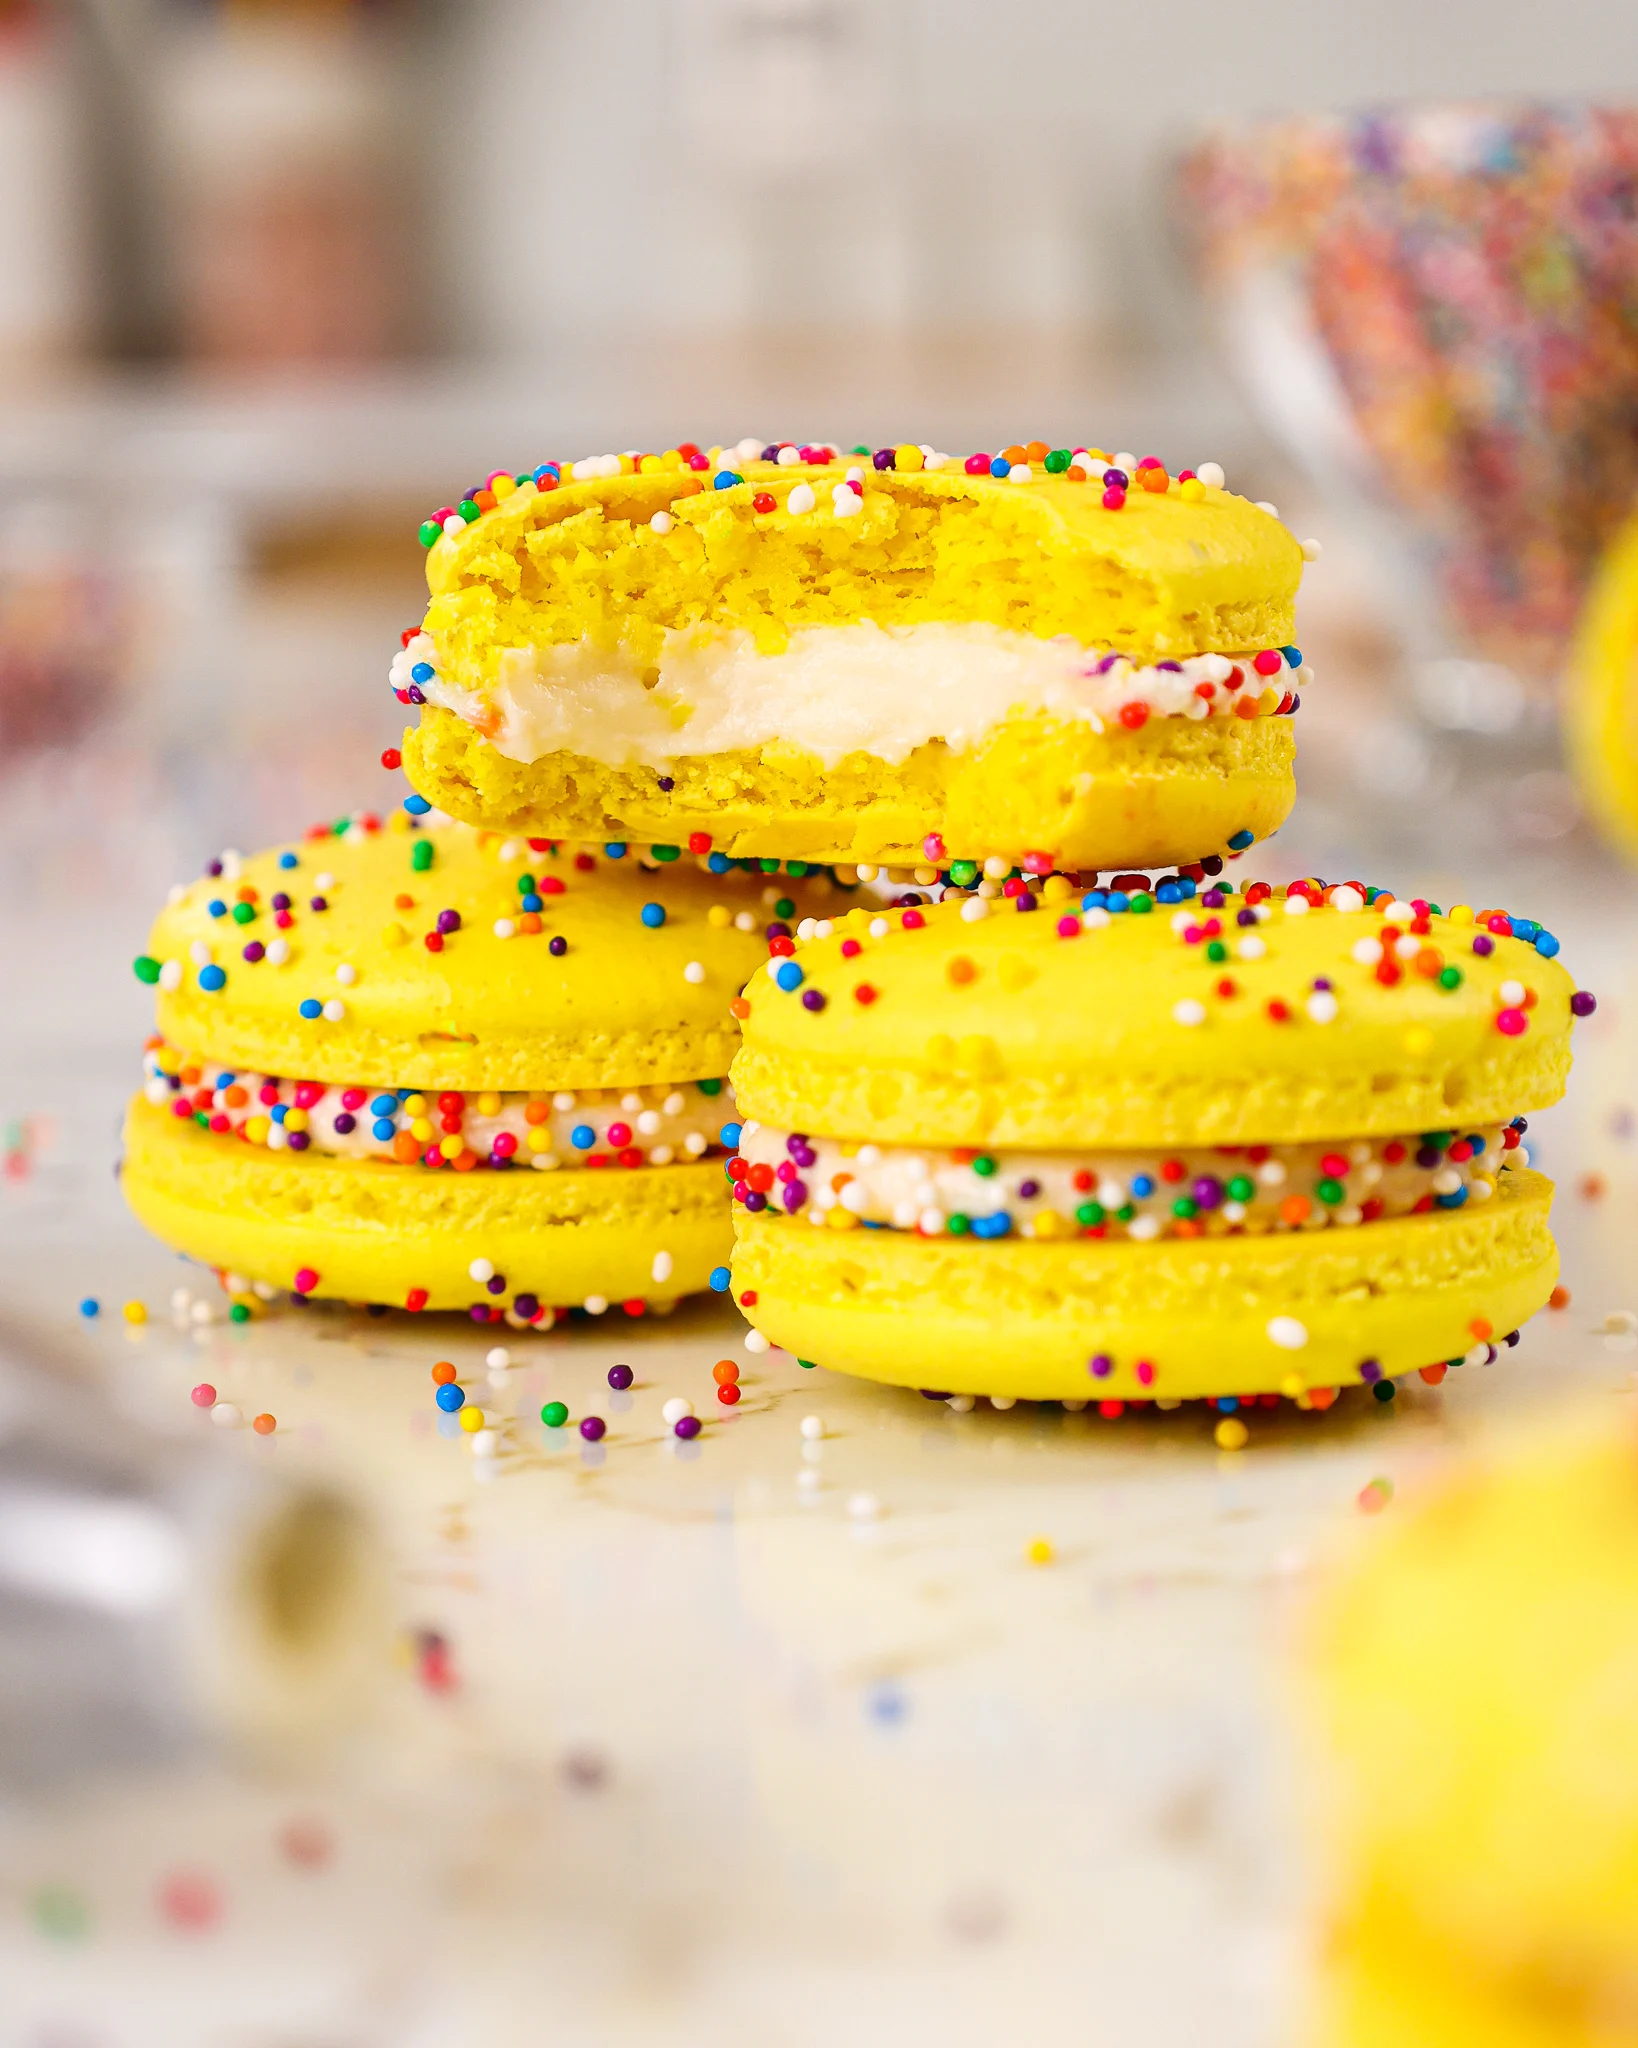 image of funfetti macarons being stacked on a plate that have been decorated with colorful nonpareil sprinkles